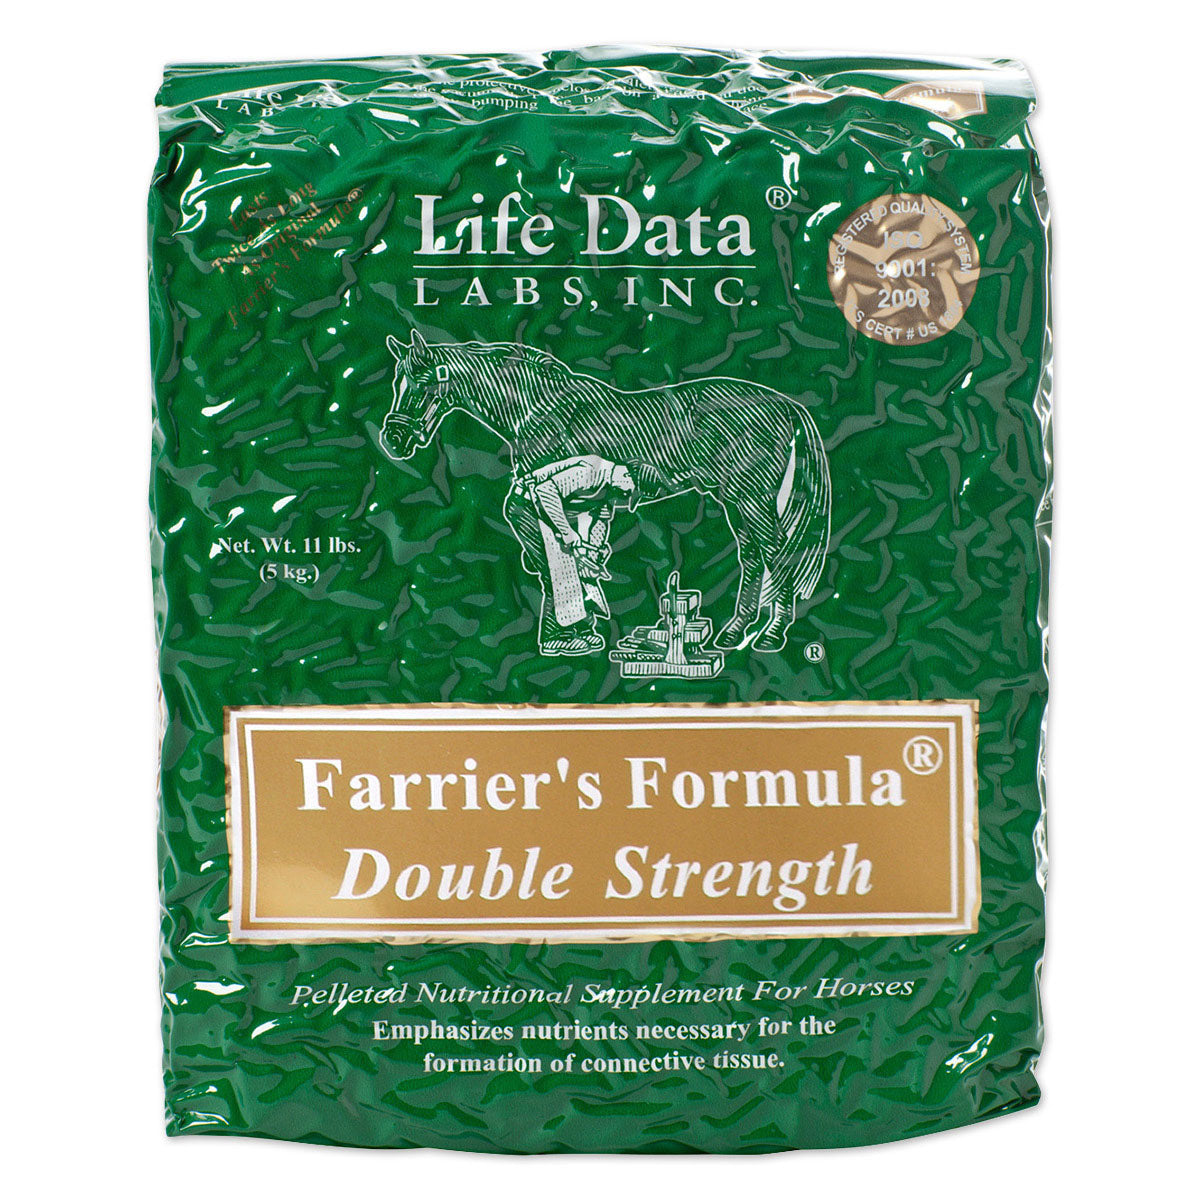 Life Data Labs Inc Farrier's Formula Double Strength